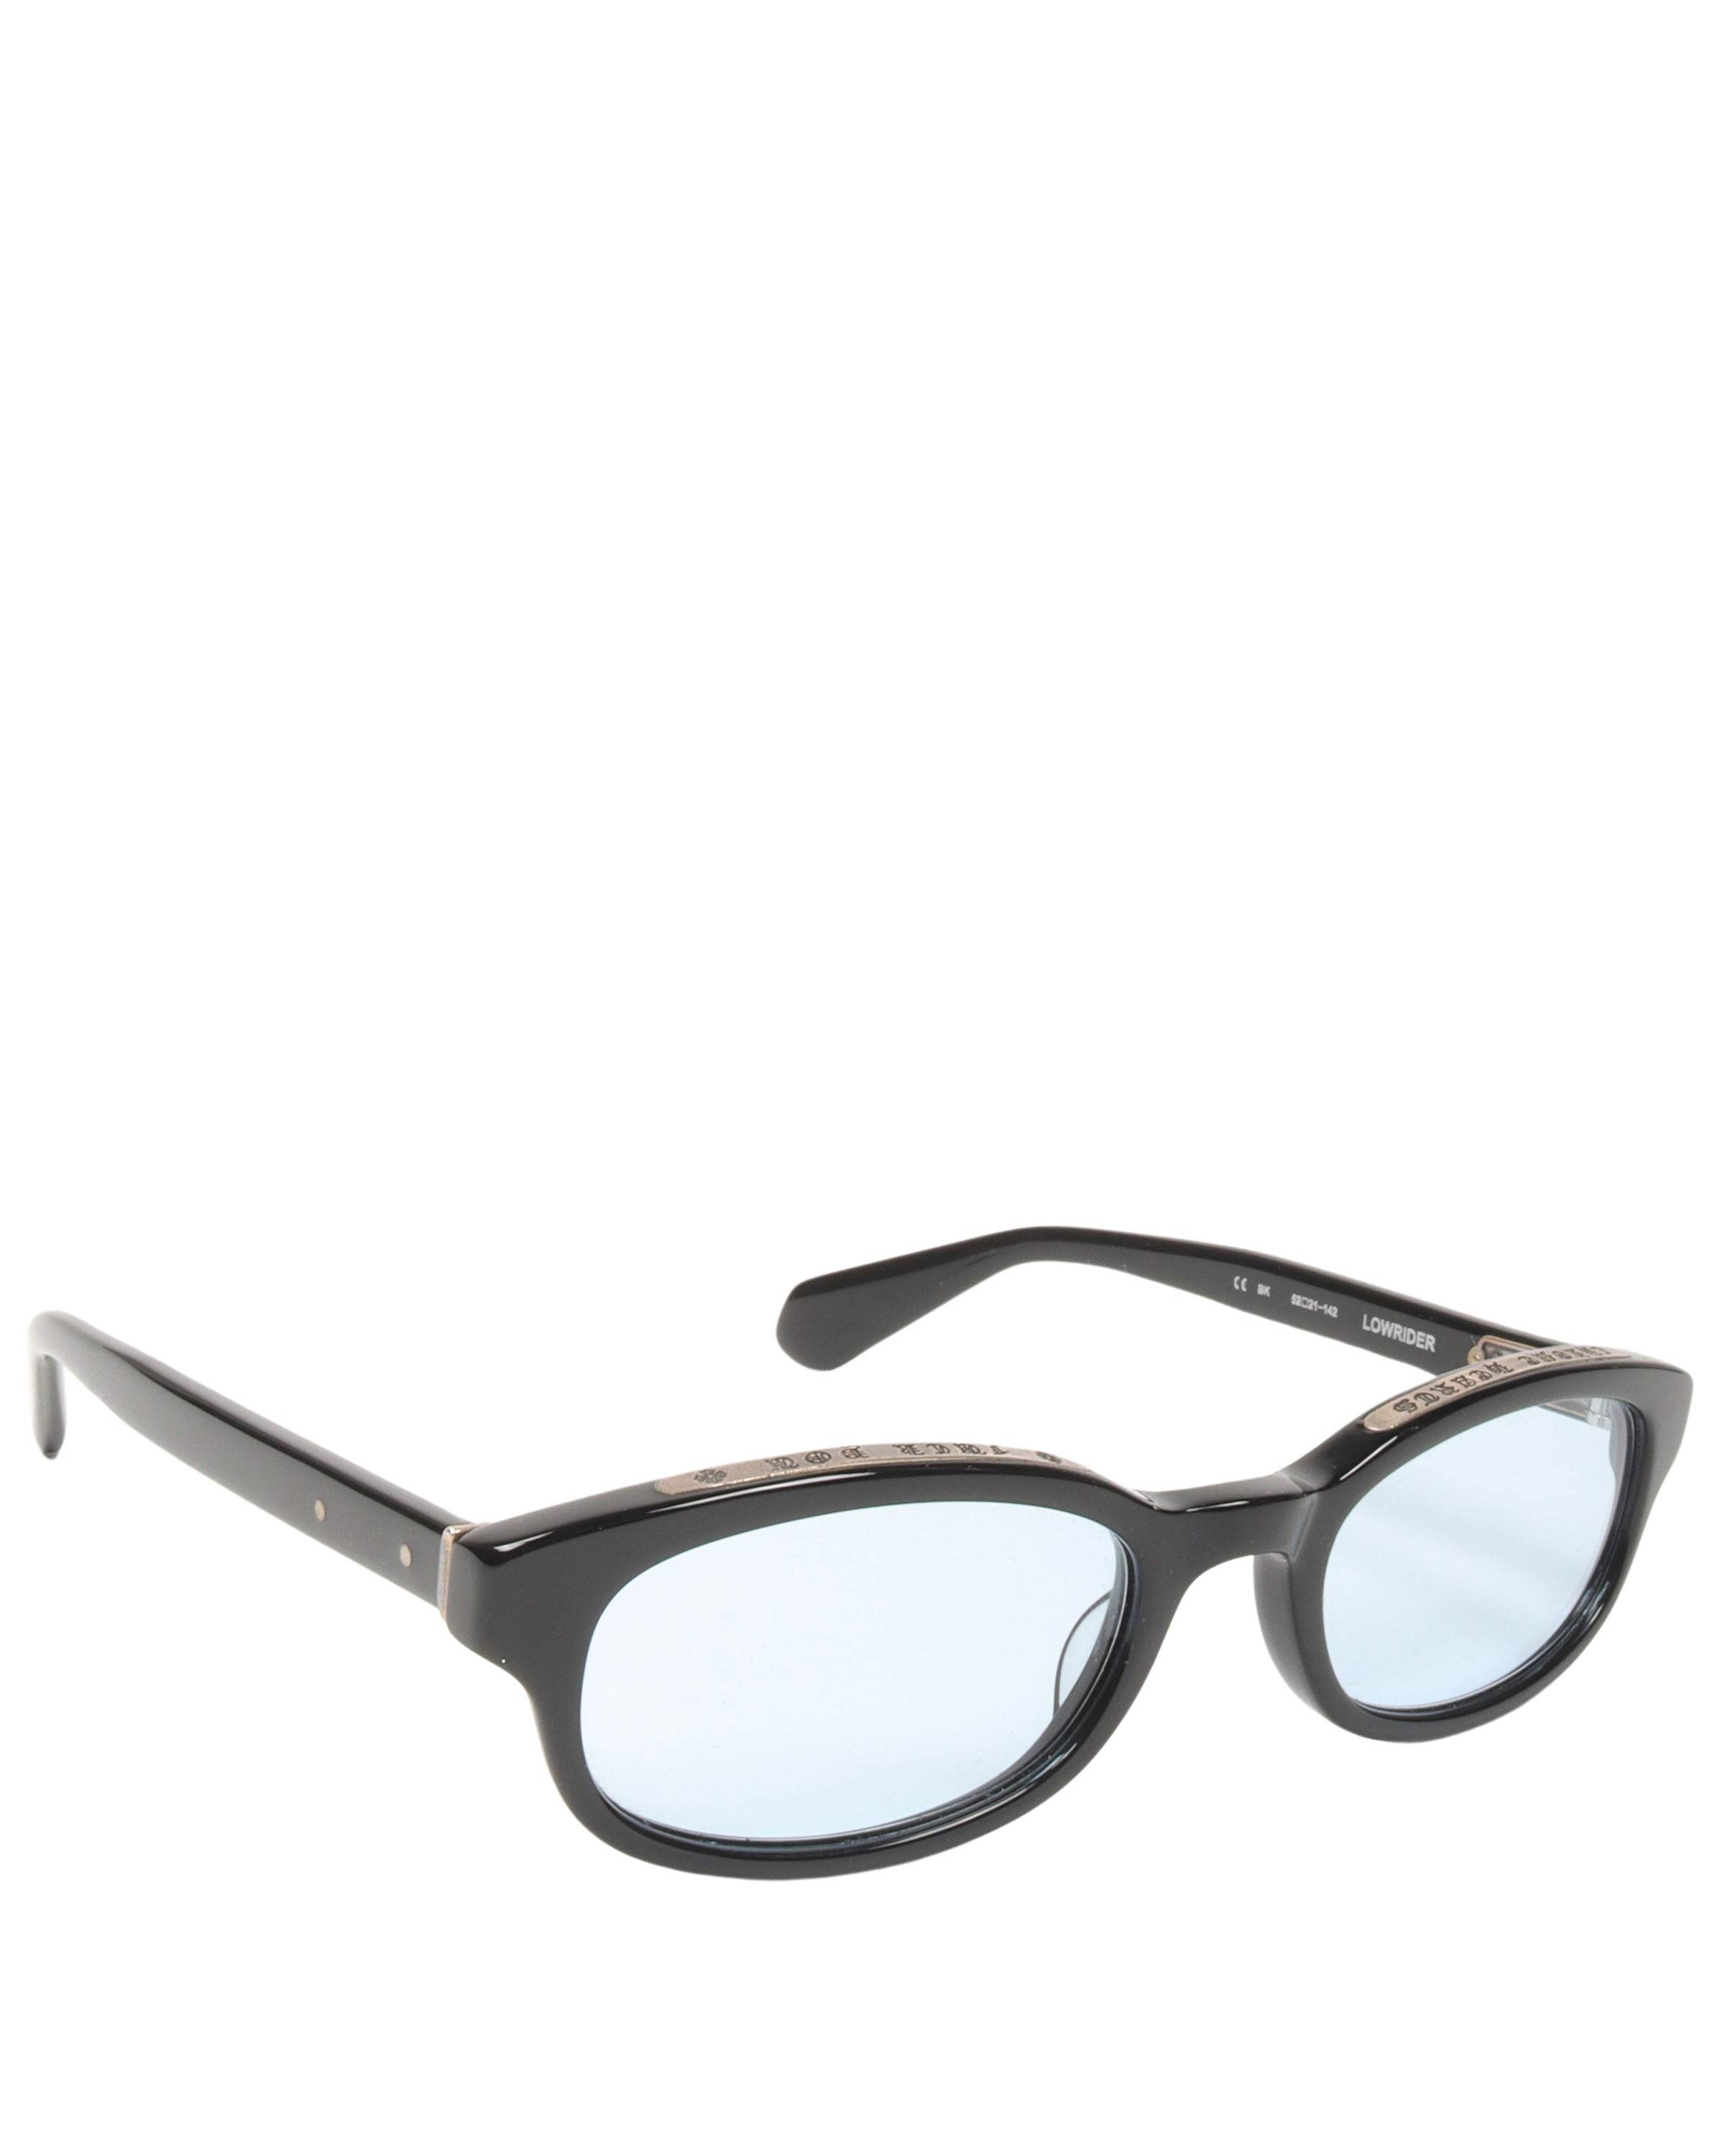 Chrome Hearts Low Rider Glasses